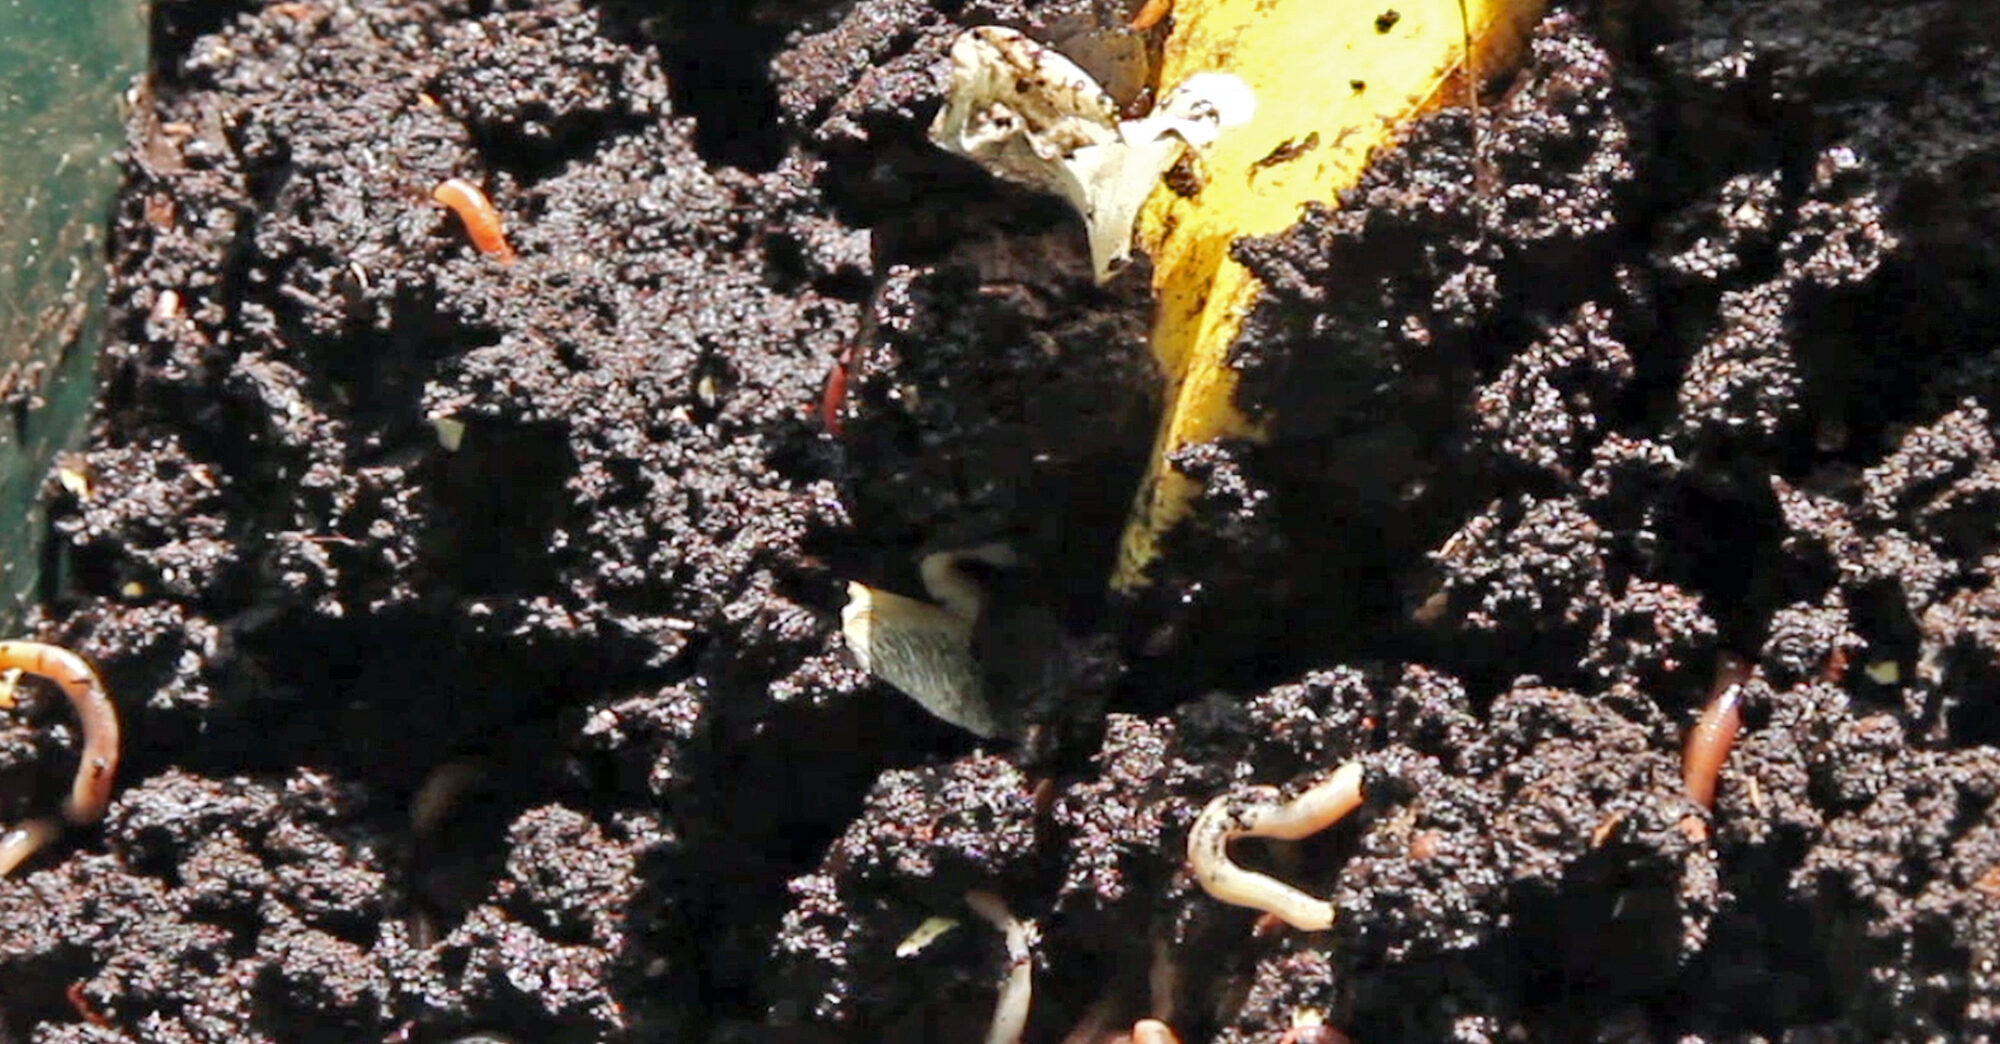 A screenshot of worms in a compost bin from my video about vermiculture, or composting with worms.